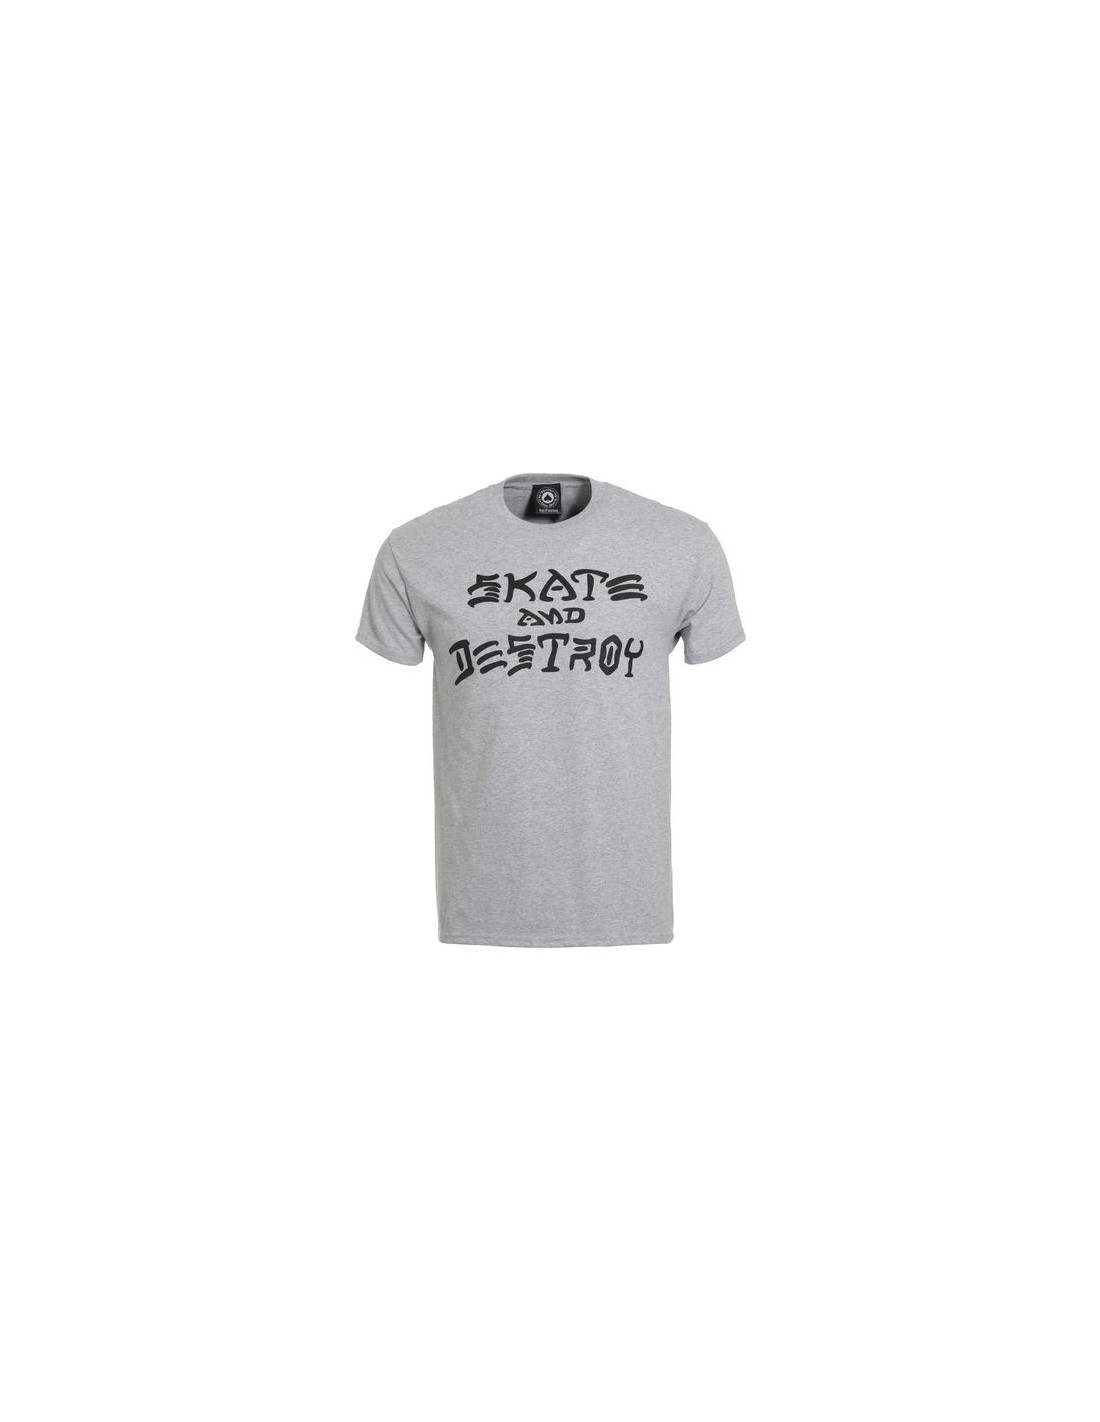 SKATE AND DESTROY TEE